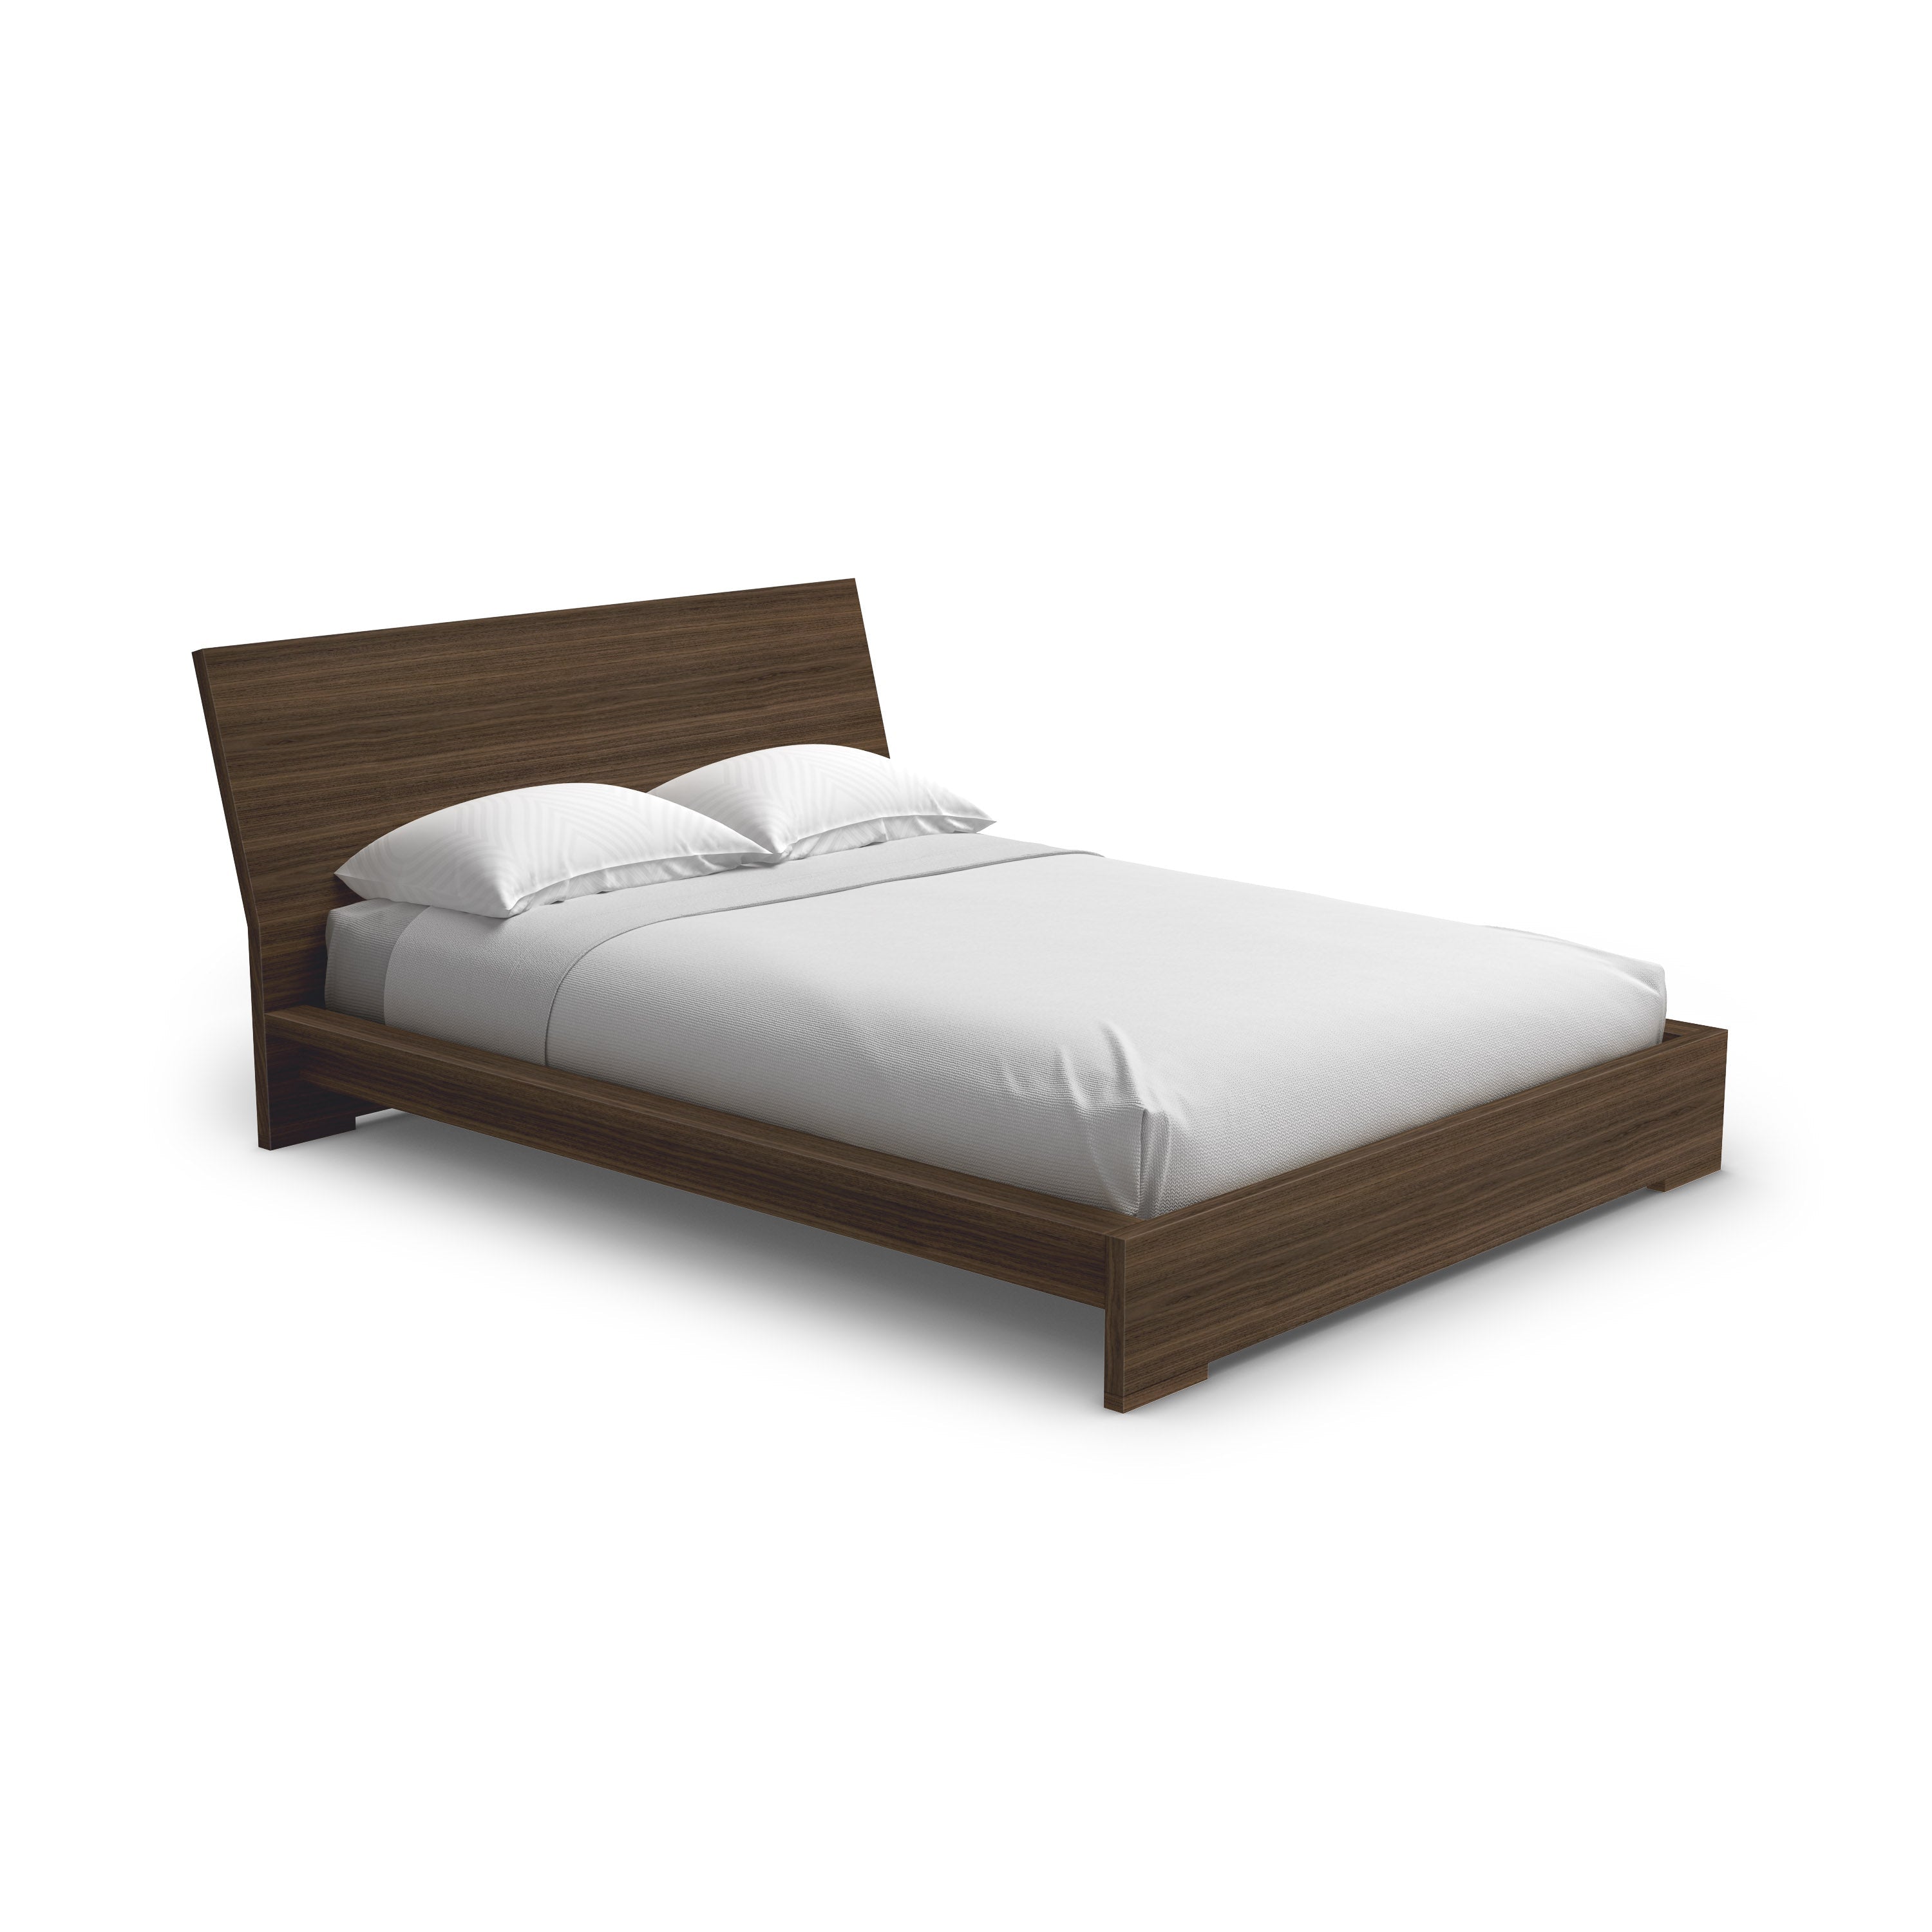 Sonoma Bed with Wood Headboard